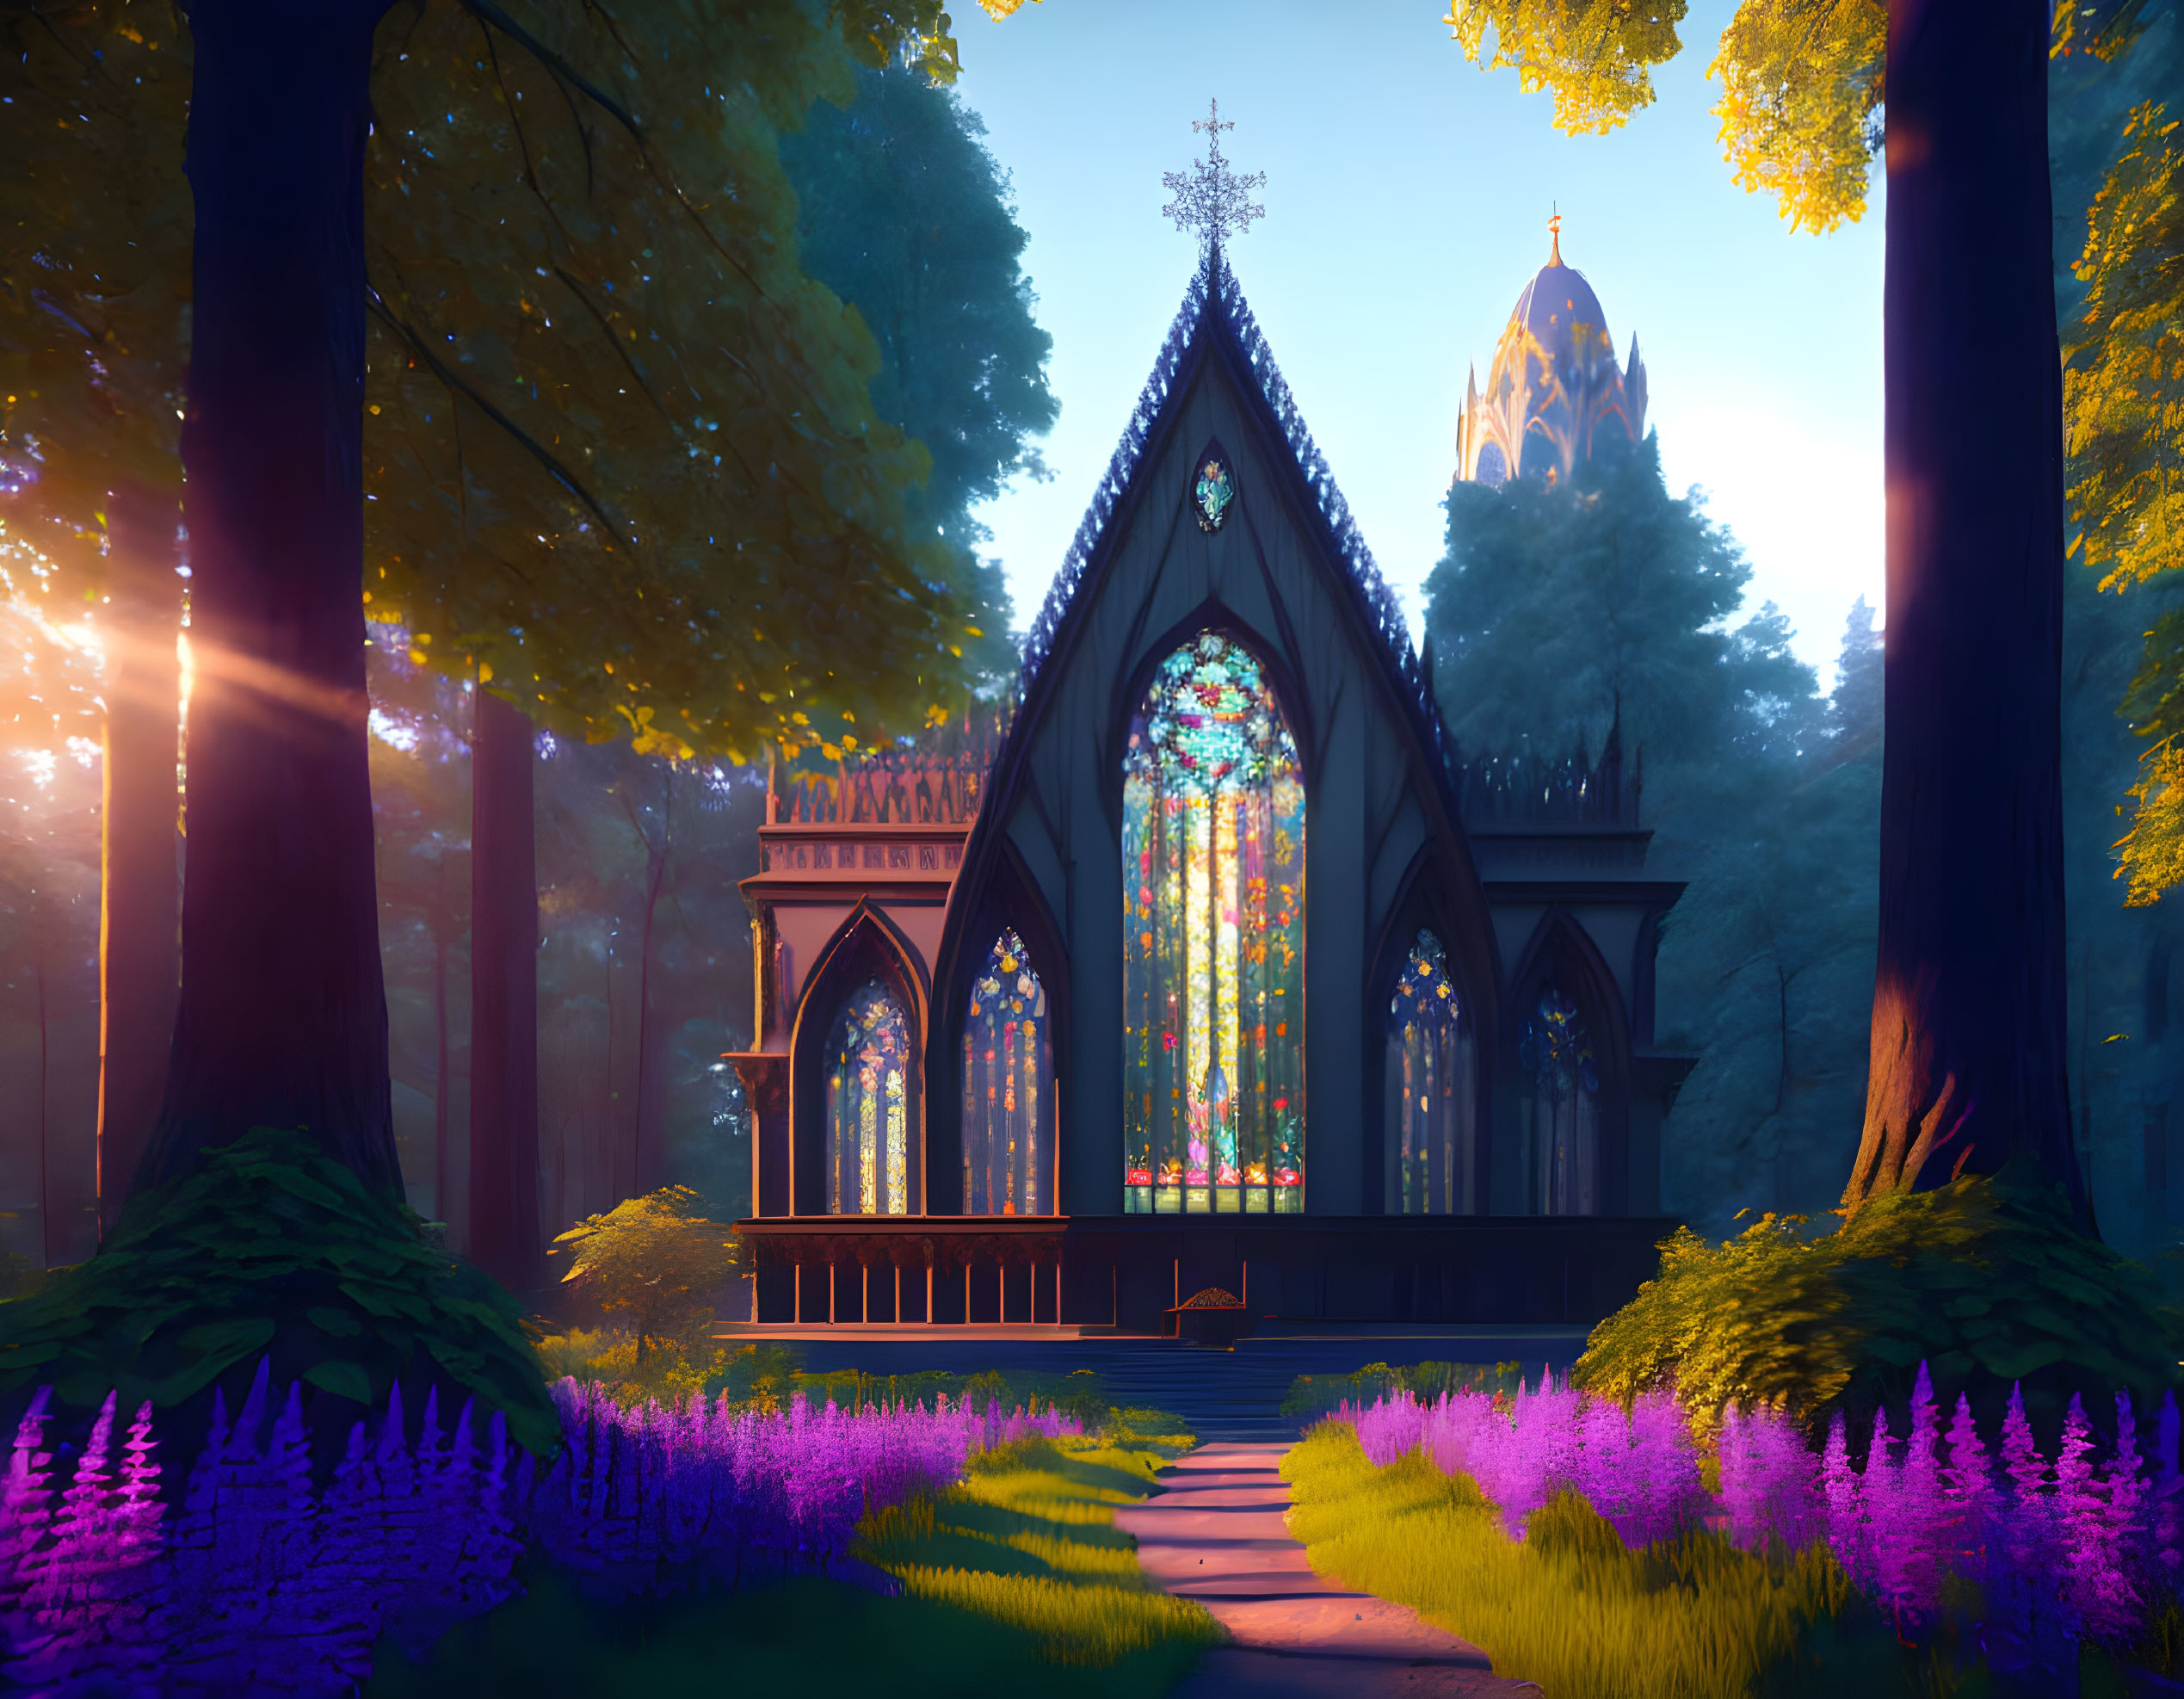 Gothic-style glass chapel in serene forest setting with vibrant stained glass